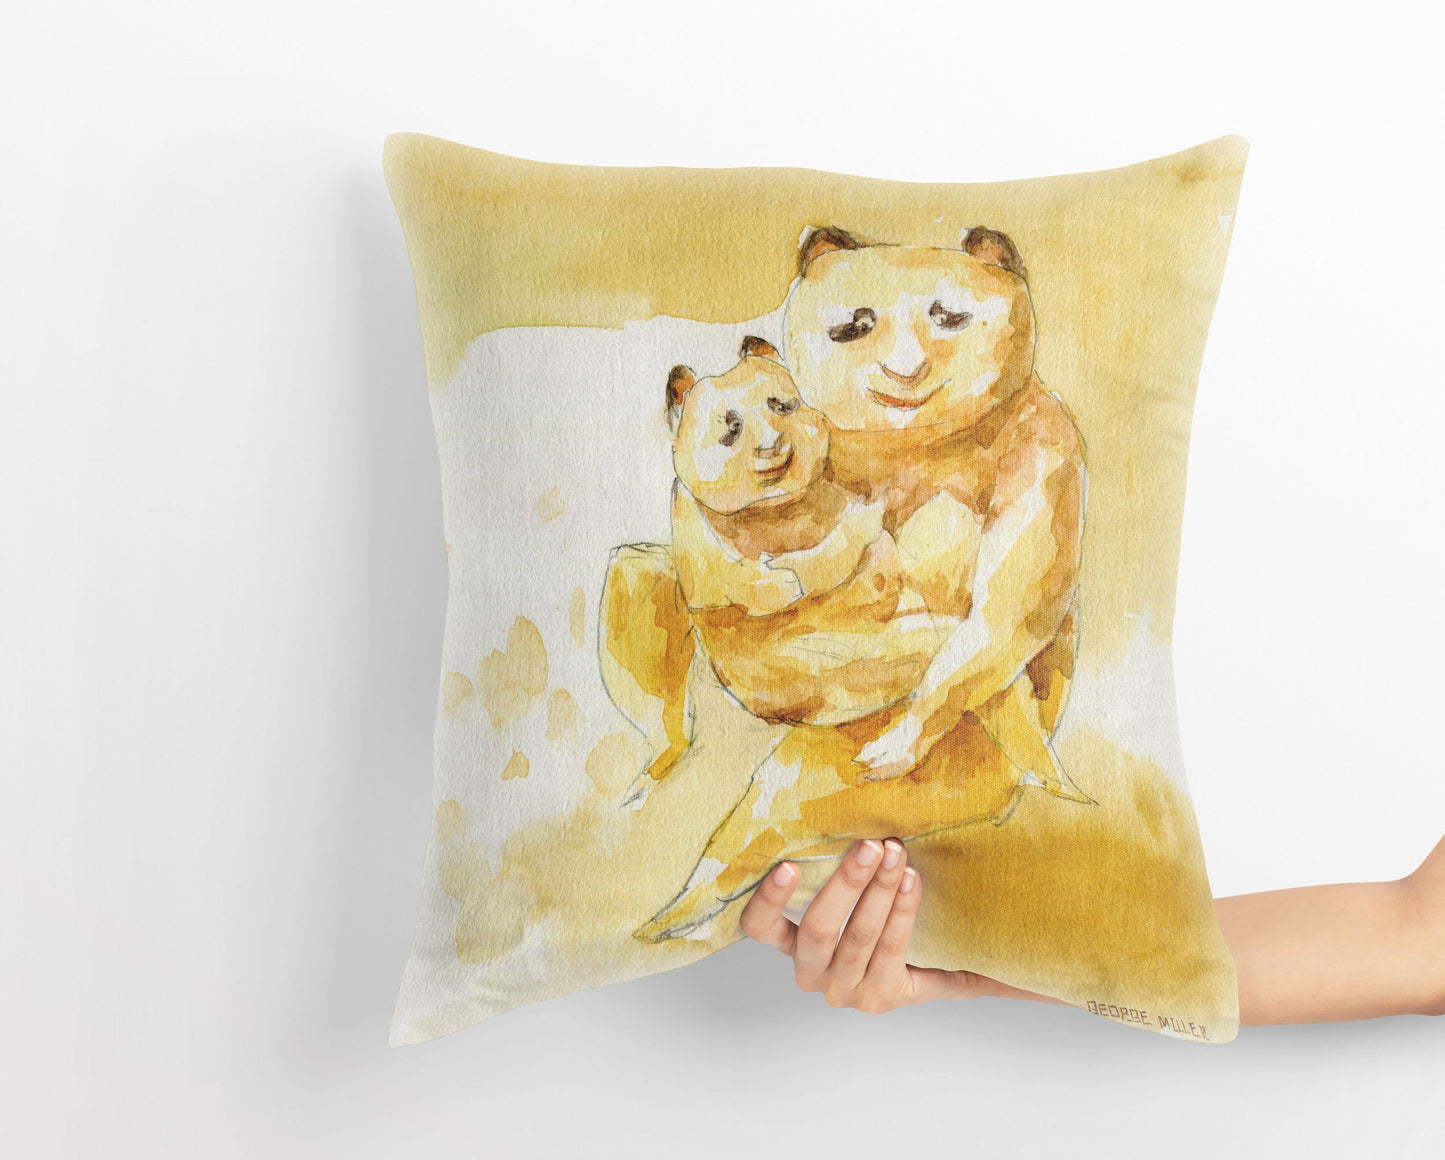 Pandas Mother And Child Fun Throw Pillows, Pillow Cases For Kids, Soft Pillow Cases, Fashion, Baby Shower Gift, Sofa Pillows